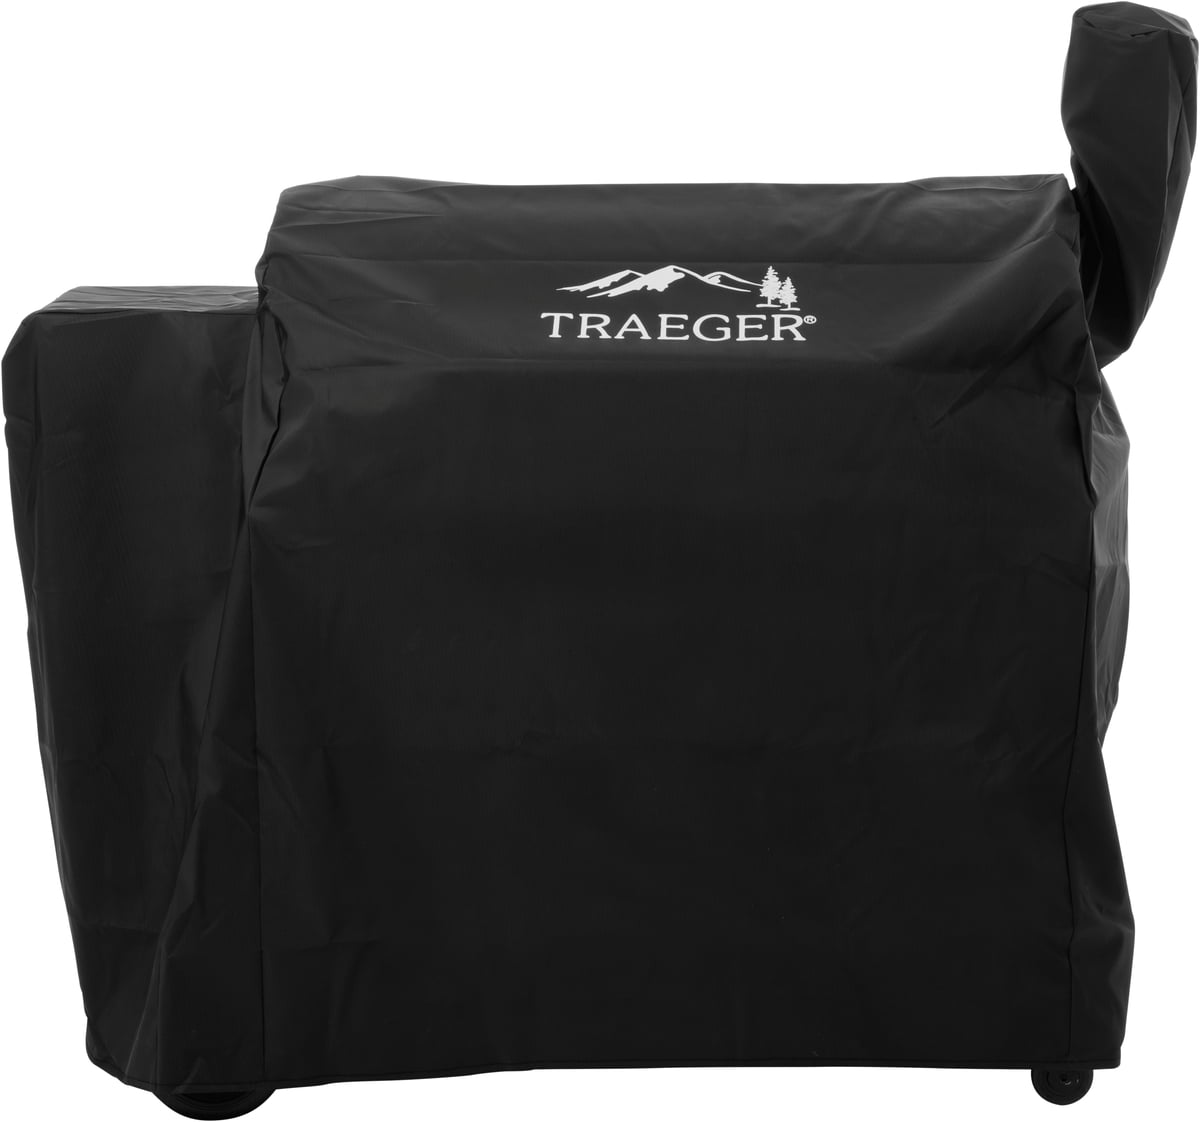 for Traeger Texas Elite 34 Series Pellet Grill and Smoker Fits Traeger 34 Series Grill and Smoker Heavy Duty Water Proof Patio Outdoor Canvas Barbeque BBQ Smoker Cover i COVER Pellet Grill Cover 